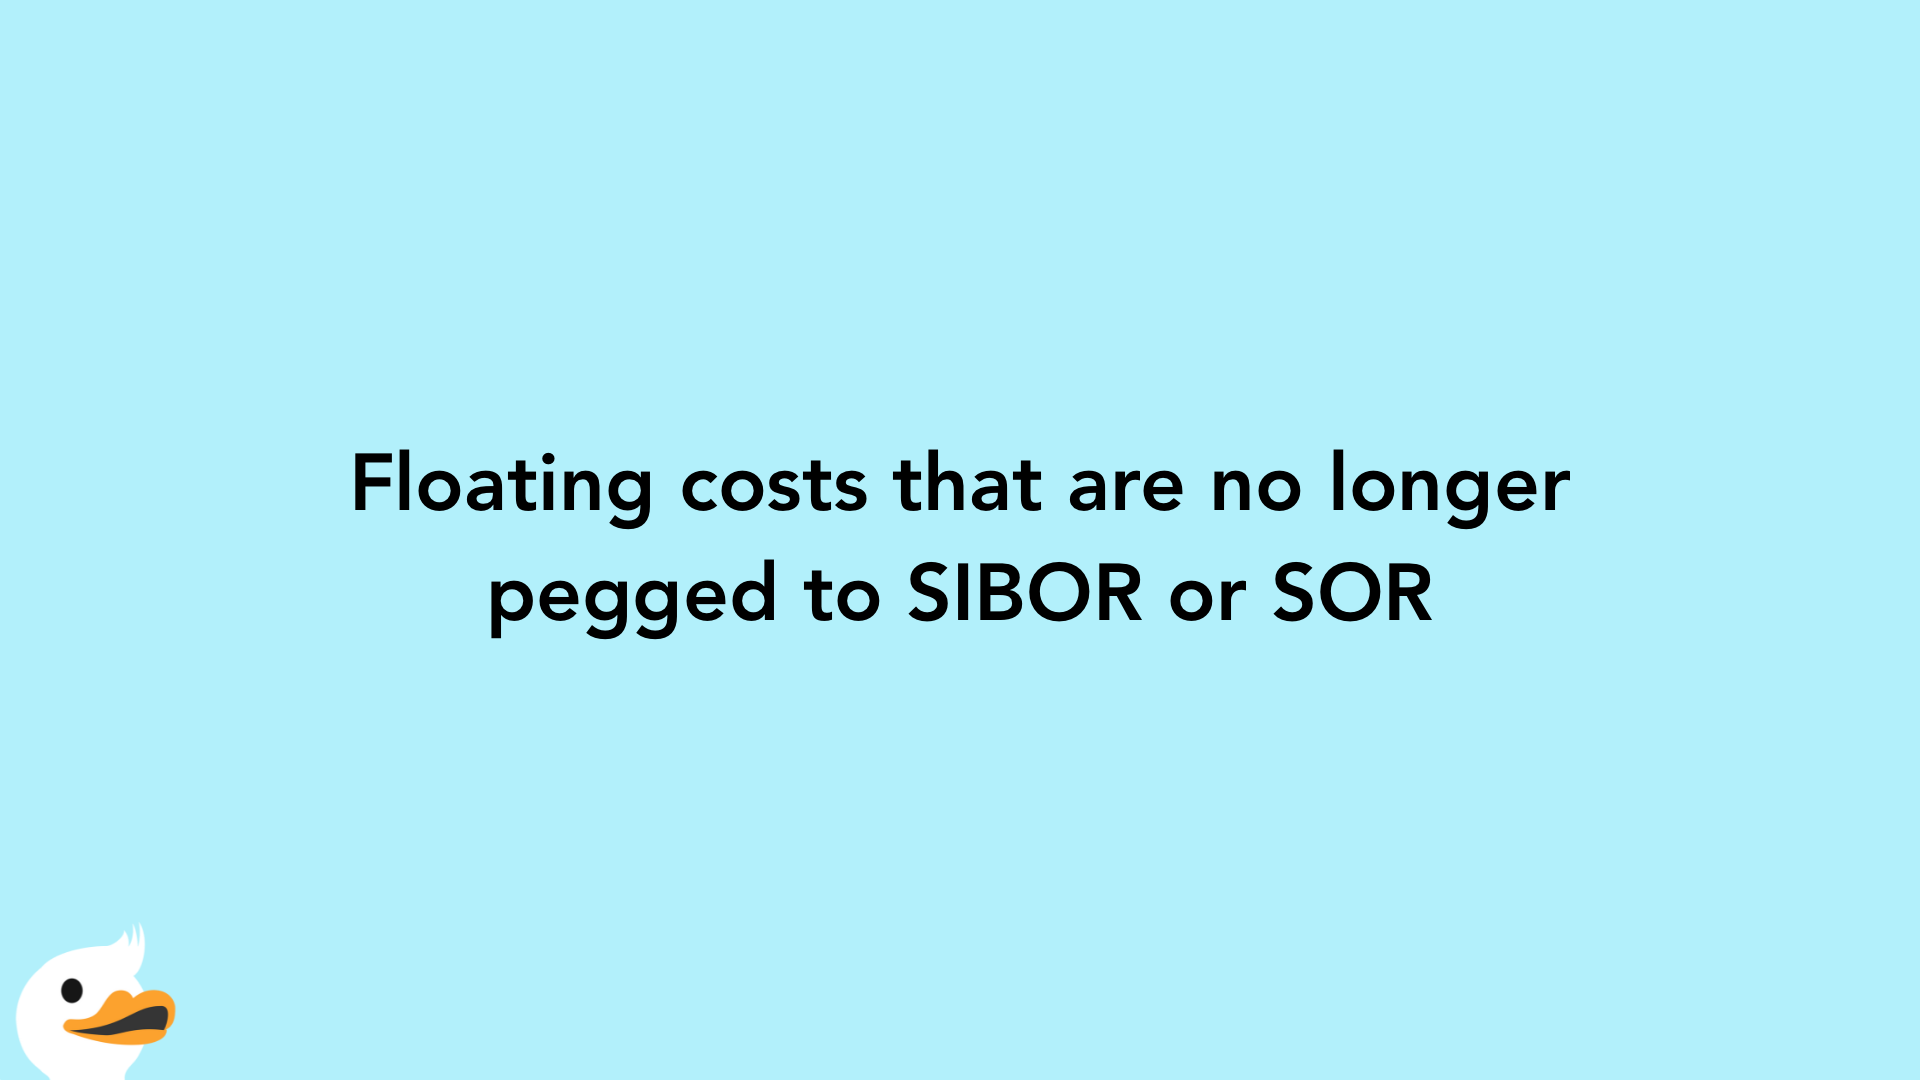 Floating costs that are no longer pegged to SIBOR or SOR